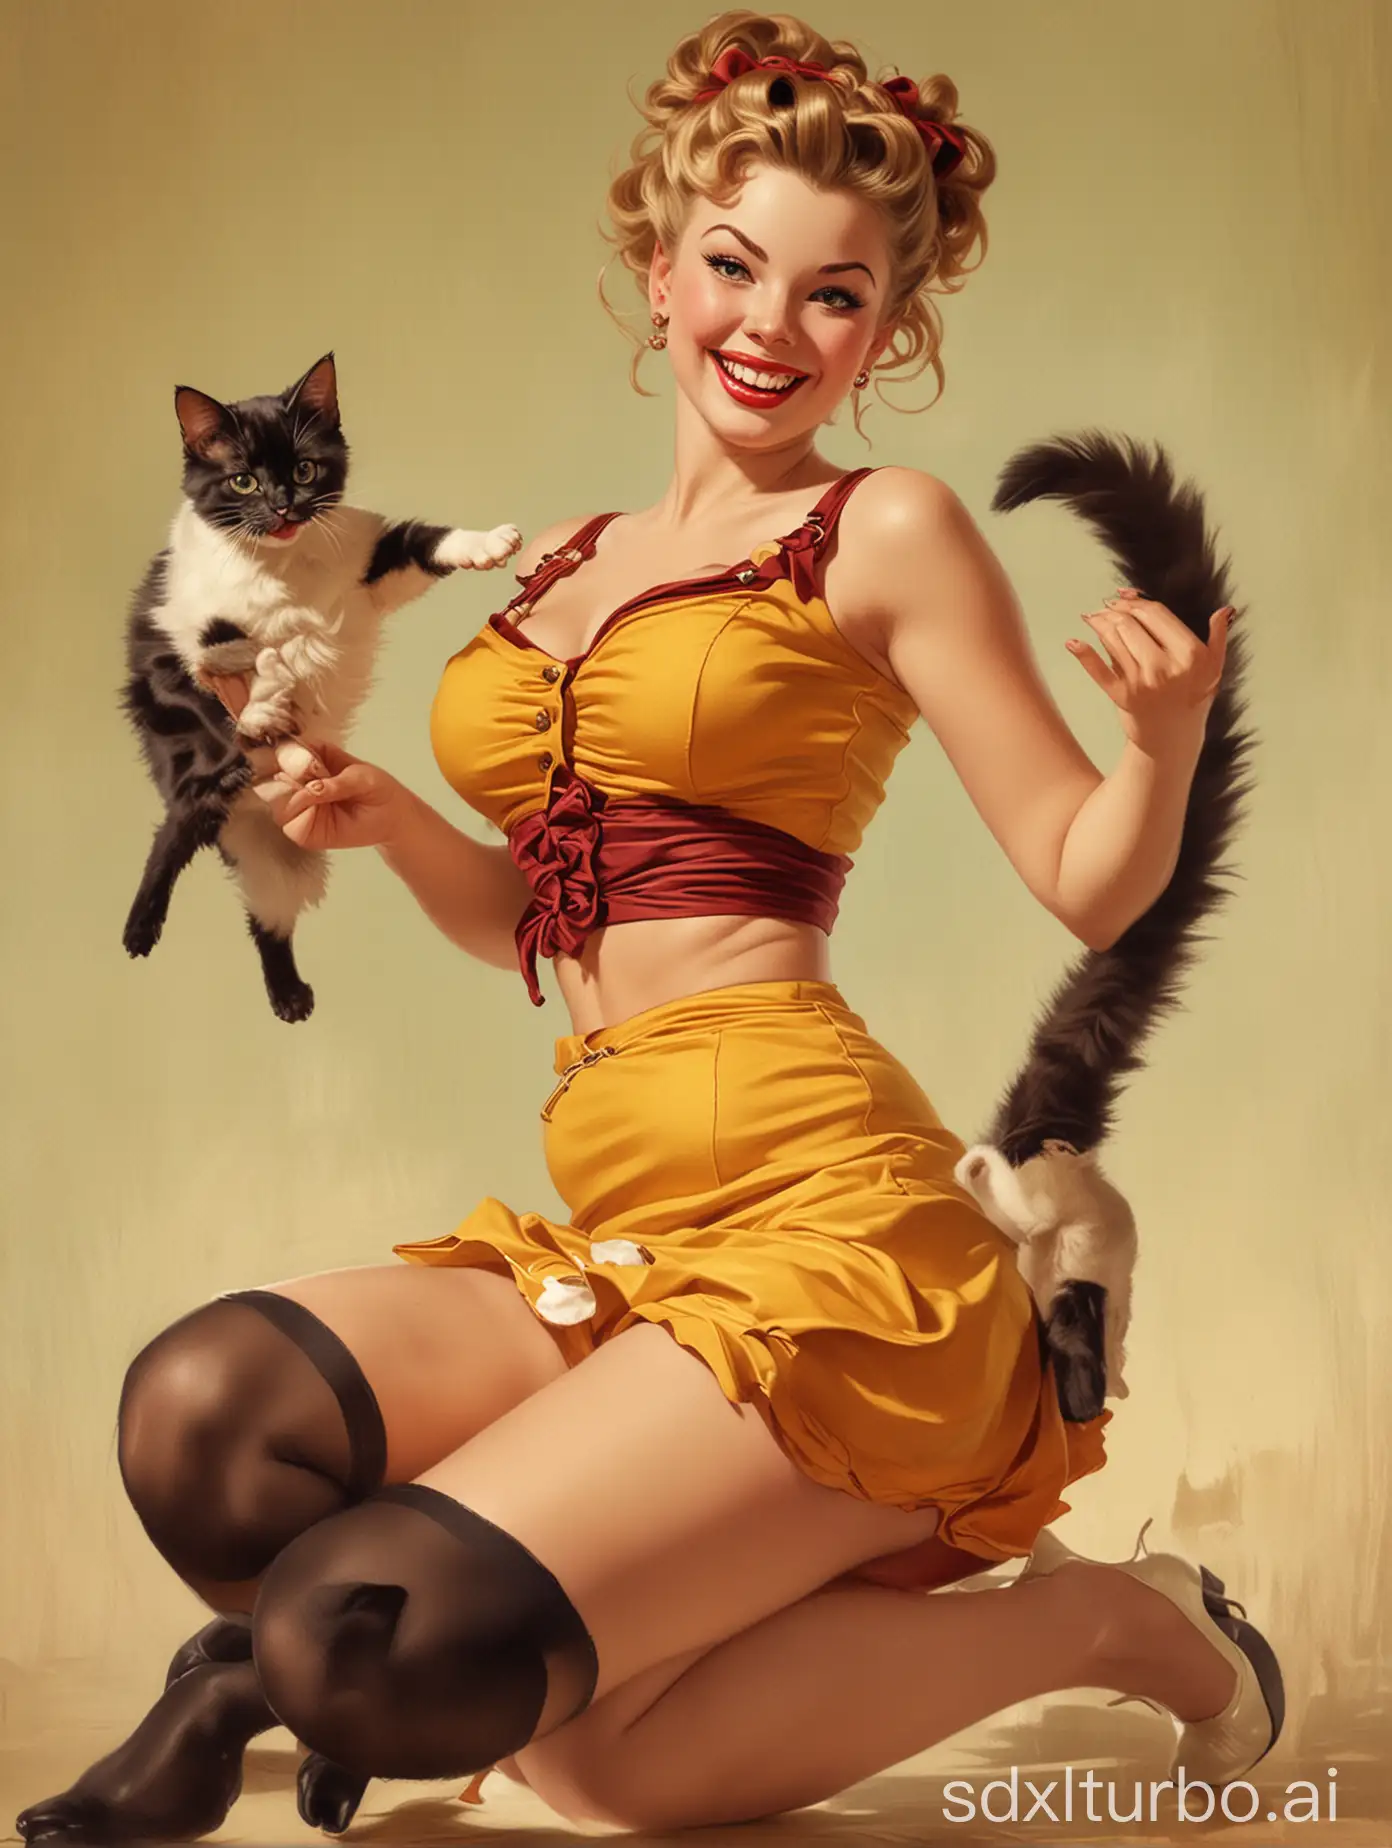 upskirt view, a Gil Elvgren painting of a woman playing with her cat, high resolution from Artgerm, pin-up style poster, idealized, smiling, trending on InterfaceLift, in a seductive Pudica pose, warm colored